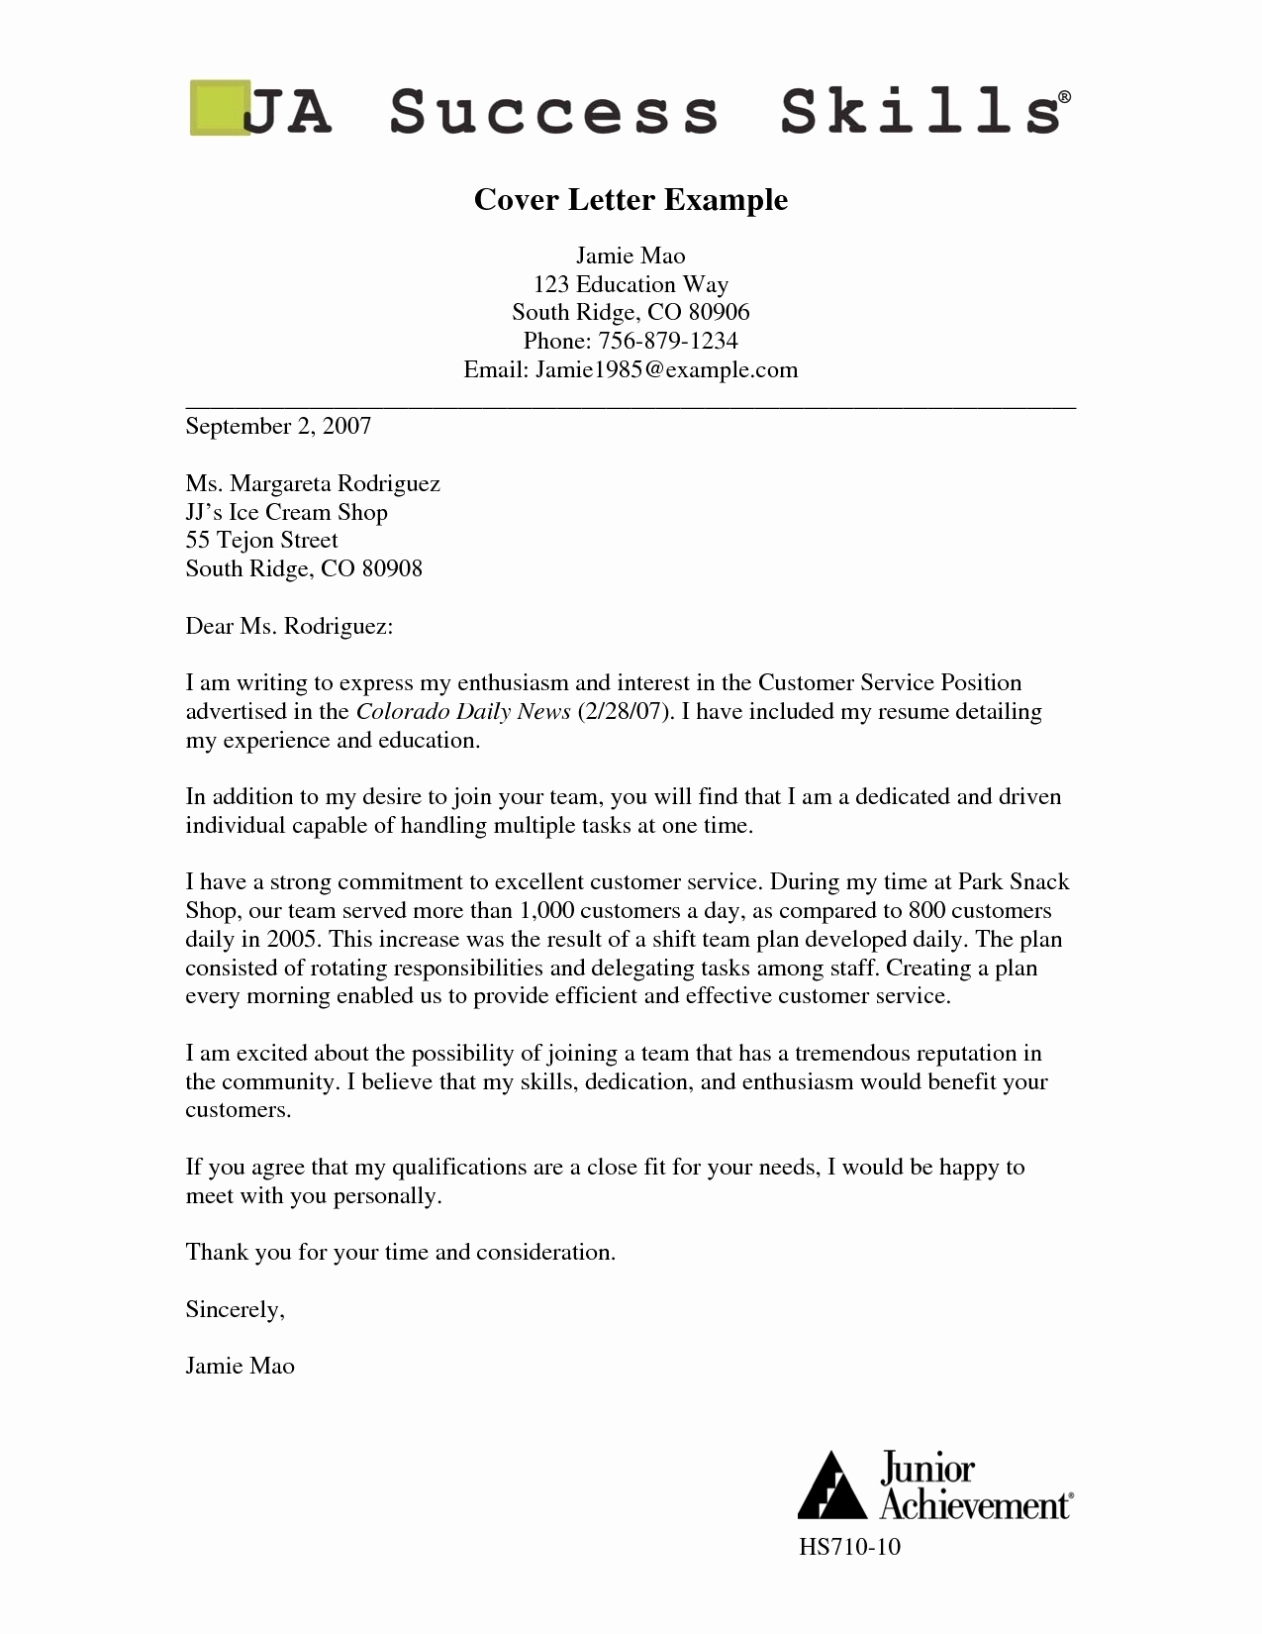 Letter Of Commitment Template Collection - Letter Template Collection Regarding Letter Of Commitment Template